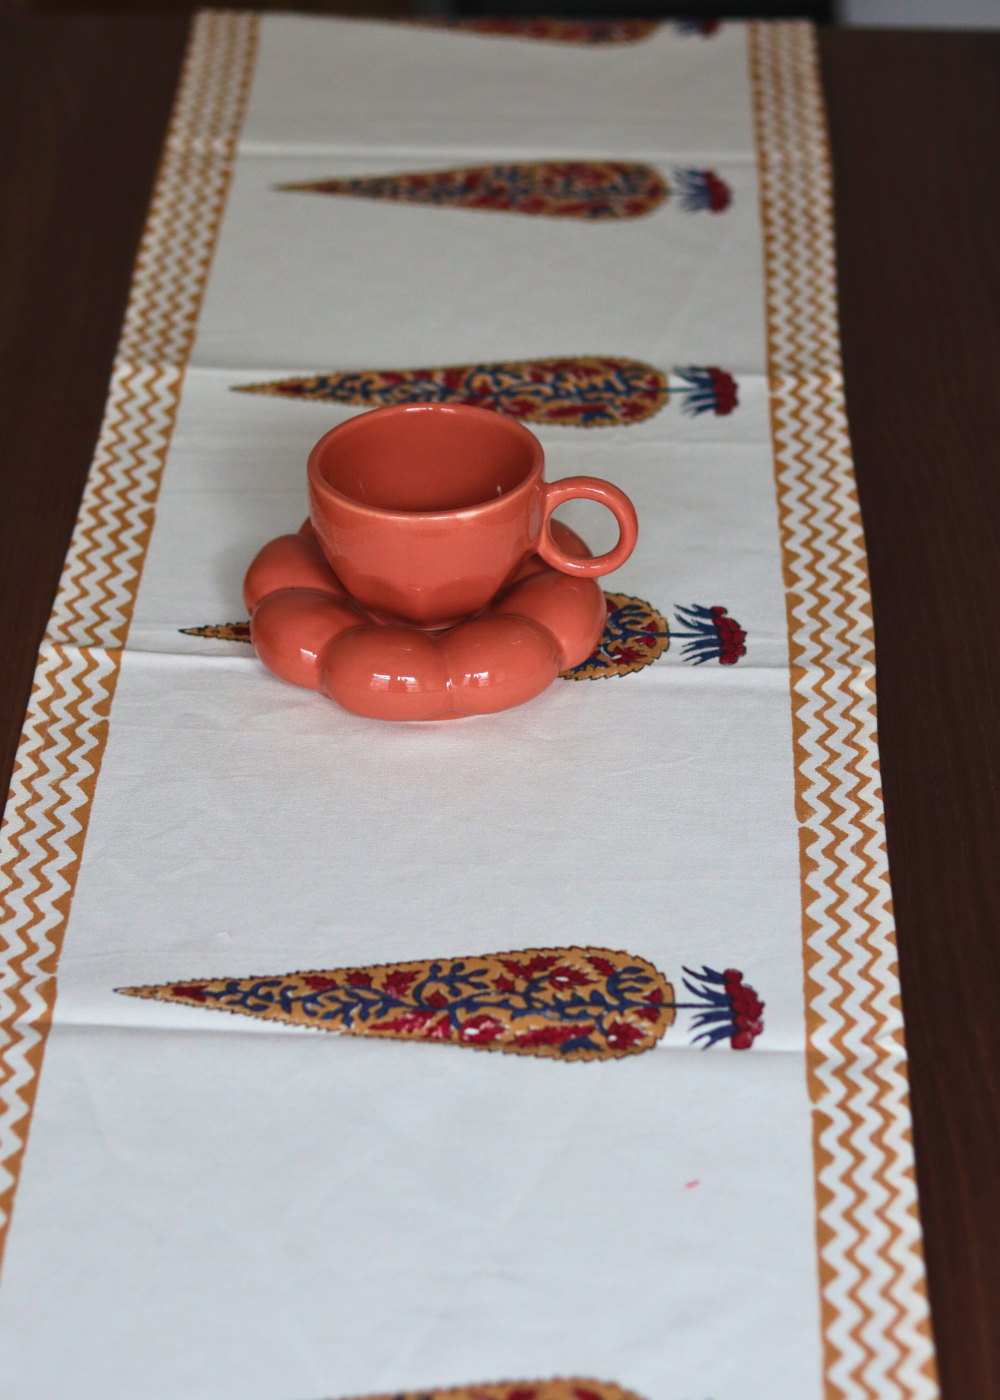 Cherry blossom table runner with cup & saucer on it